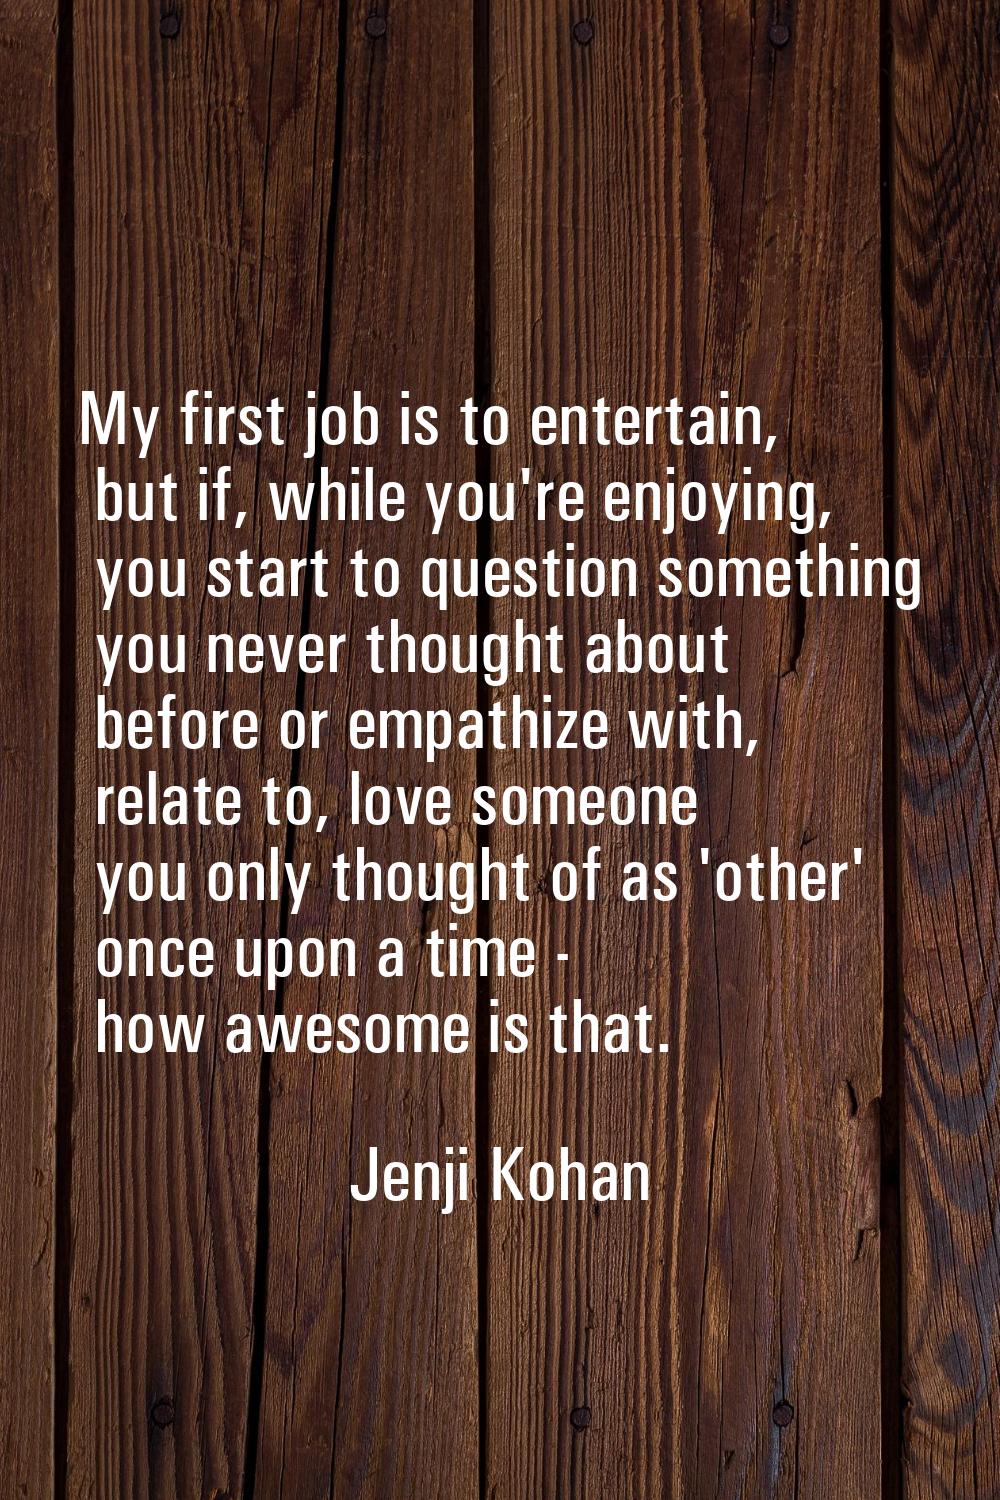 My first job is to entertain, but if, while you're enjoying, you start to question something you ne